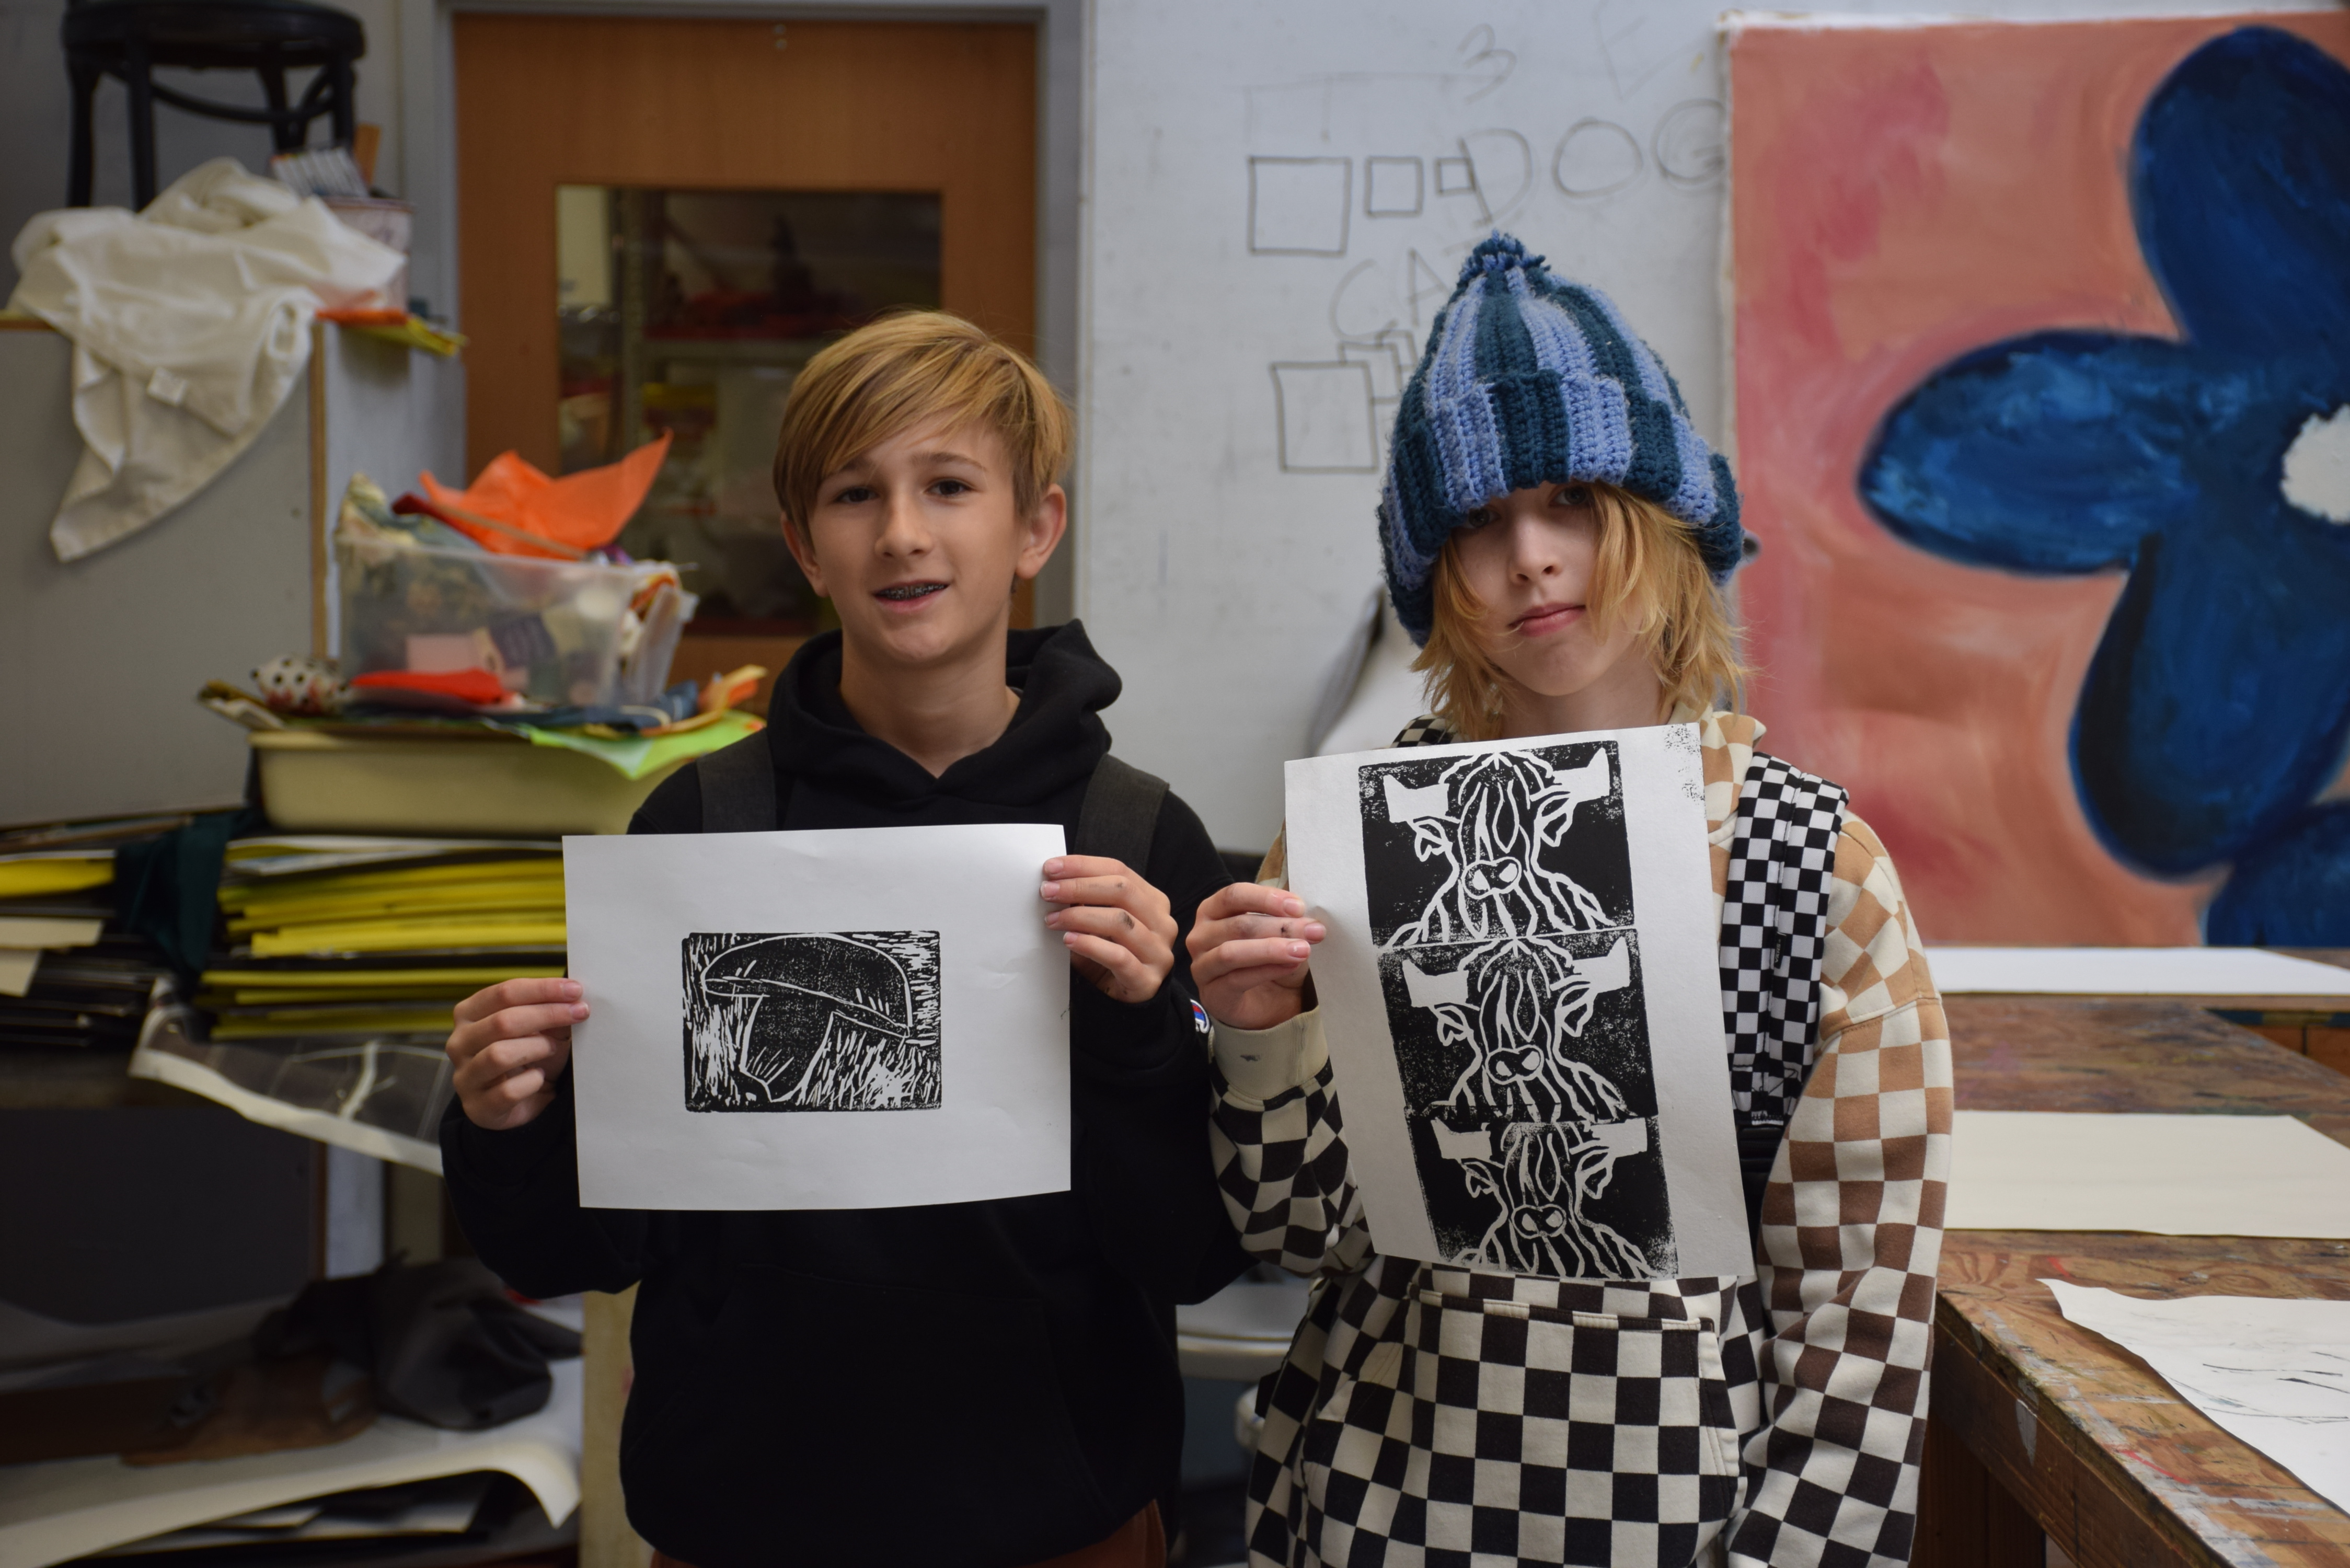 Pierson Middle School sixth grade students, Maddock Lynch and Travis Galin, showed off their printmaking art pieces from Elizabeth Cataletto’s middle school art class. The students started the academic session learning about the history of printmaking through 18th-century Ukiyo-E Japanese printmaking techniques. To create the artwork themselves, they used the linoleum process and learned how to carve plates and make hand-made prints. COURTESY SAG HARBOR SCHOOL DISTRICT